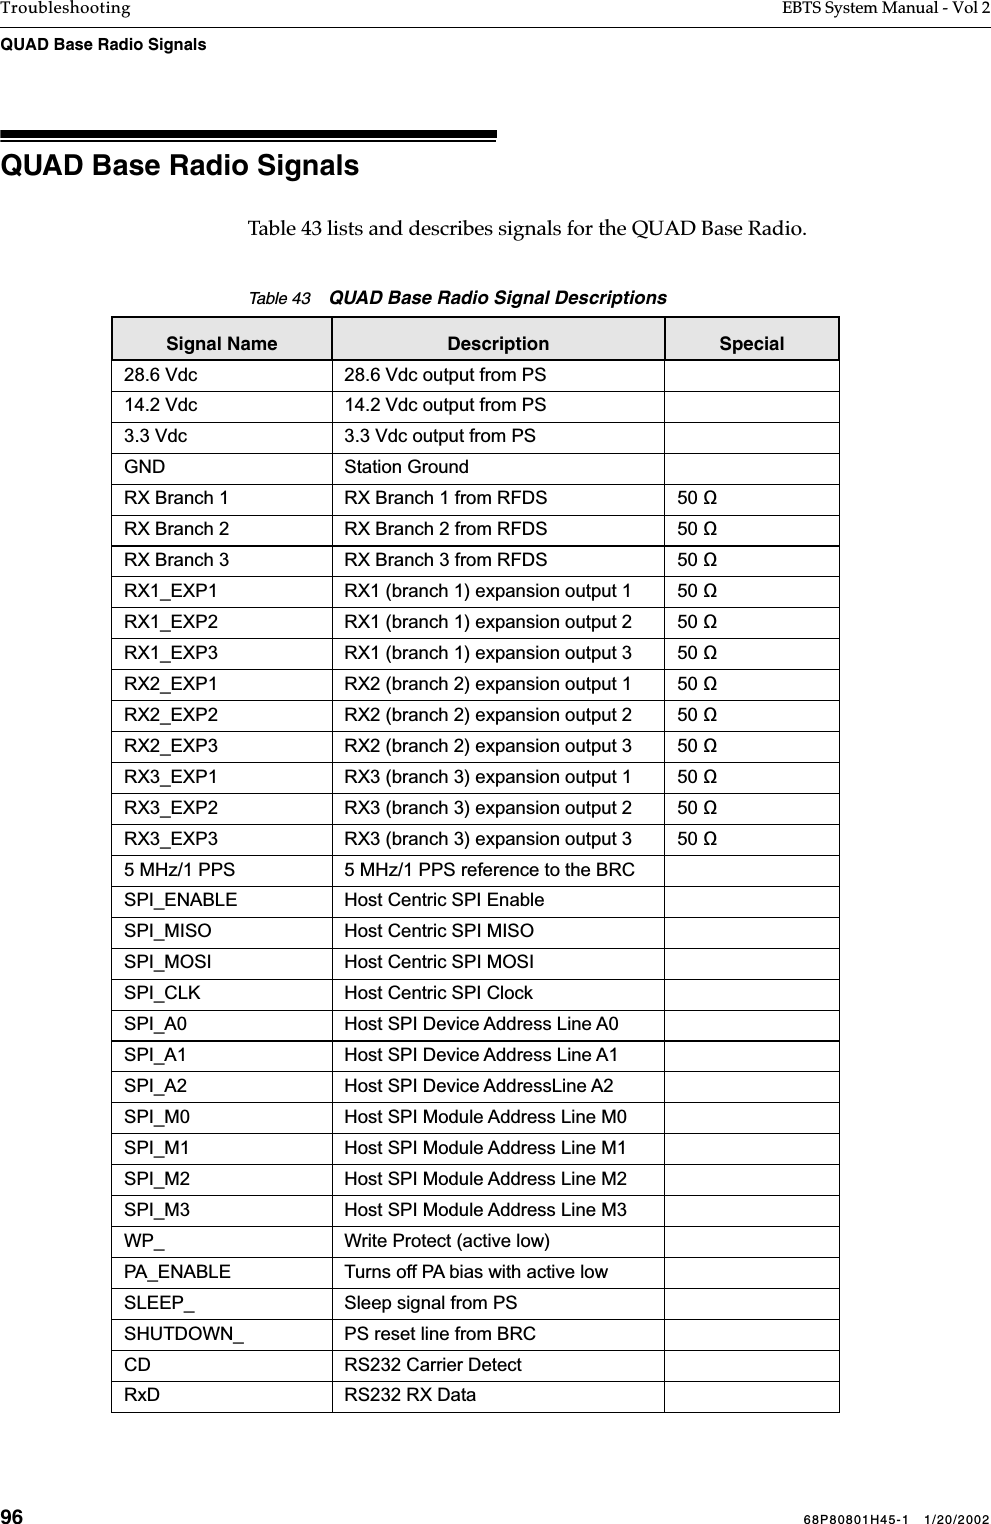 96 68P80801H45-1   1/20/2002Troubleshooting EBTS System Manual - Vol 2QUAD Base Radio Signals QUAD Base Radio SignalsTable 43 lists and describes signals for the QUAD Base Radio.Table 43    QUAD Base Radio Signal Descriptions Signal Name Description Special28.6 Vdc 28.6 Vdc output from PS14.2 Vdc 14.2 Vdc output from PS3.3 Vdc 3.3 Vdc output from PSGND Station GroundRX Branch 1 RX Branch 1 from RFDS 50 ΩRX Branch 2 RX Branch 2 from RFDS 50 ΩRX Branch 3 RX Branch 3 from RFDS 50 ΩRX1_EXP1 RX1 (branch 1) expansion output 1 50 ΩRX1_EXP2 RX1 (branch 1) expansion output 2 50 ΩRX1_EXP3 RX1 (branch 1) expansion output 3 50 ΩRX2_EXP1 RX2 (branch 2) expansion output 1 50 ΩRX2_EXP2 RX2 (branch 2) expansion output 2 50 ΩRX2_EXP3 RX2 (branch 2) expansion output 3 50 ΩRX3_EXP1 RX3 (branch 3) expansion output 1 50 ΩRX3_EXP2 RX3 (branch 3) expansion output 2 50 ΩRX3_EXP3 RX3 (branch 3) expansion output 3 50 Ω5 MHz/1 PPS 5 MHz/1 PPS reference to the BRCSPI_ENABLE Host Centric SPI EnableSPI_MISO Host Centric SPI MISOSPI_MOSI Host Centric SPI MOSISPI_CLK Host Centric SPI ClockSPI_A0 Host SPI Device Address Line A0SPI_A1 Host SPI Device Address Line A1SPI_A2 Host SPI Device AddressLine A2SPI_M0 Host SPI Module Address Line M0SPI_M1 Host SPI Module Address Line M1SPI_M2 Host SPI Module Address Line M2SPI_M3 Host SPI Module Address Line M3WP_ Write Protect (active low)PA_ENABLE Turns off PA bias with active lowSLEEP_ Sleep signal from PSSHUTDOWN_ PS reset line from BRCCD RS232 Carrier DetectRxD RS232 RX Data